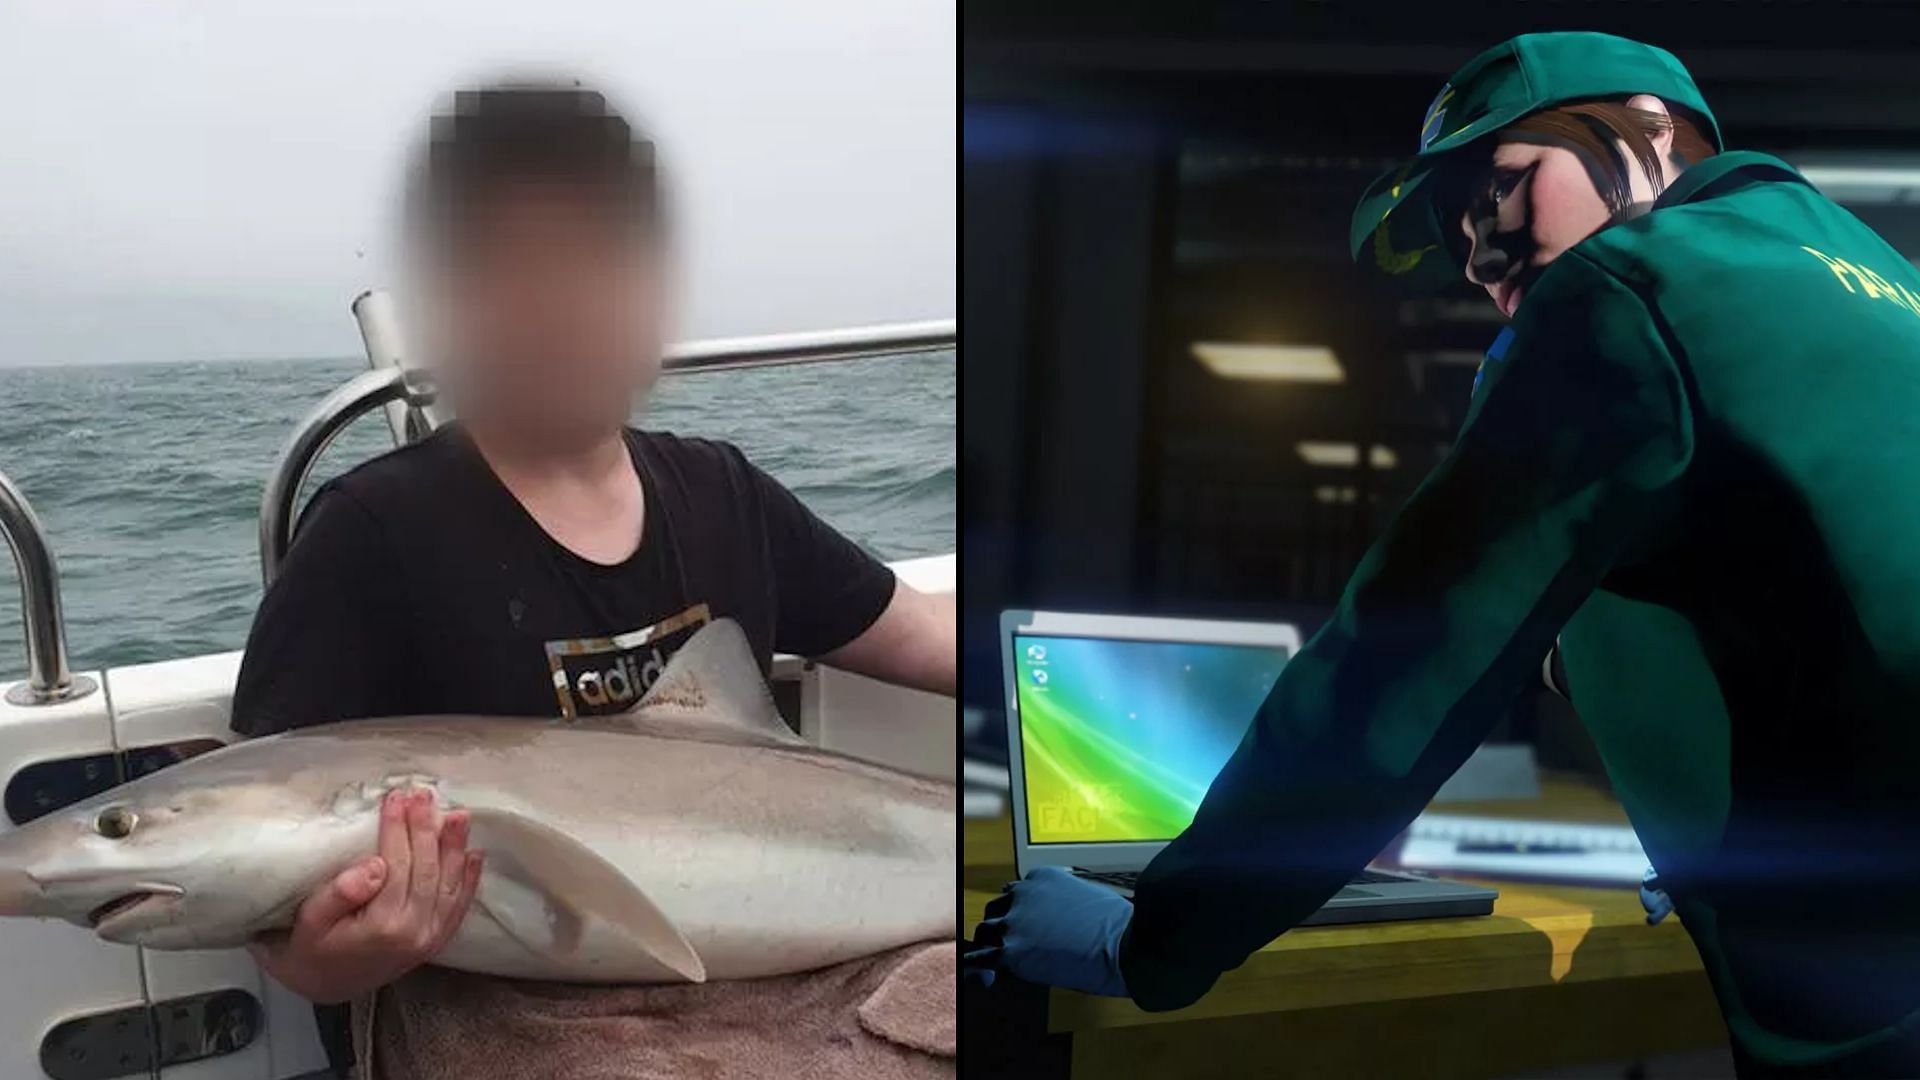 A censored image of the alleged hacker is on the left side